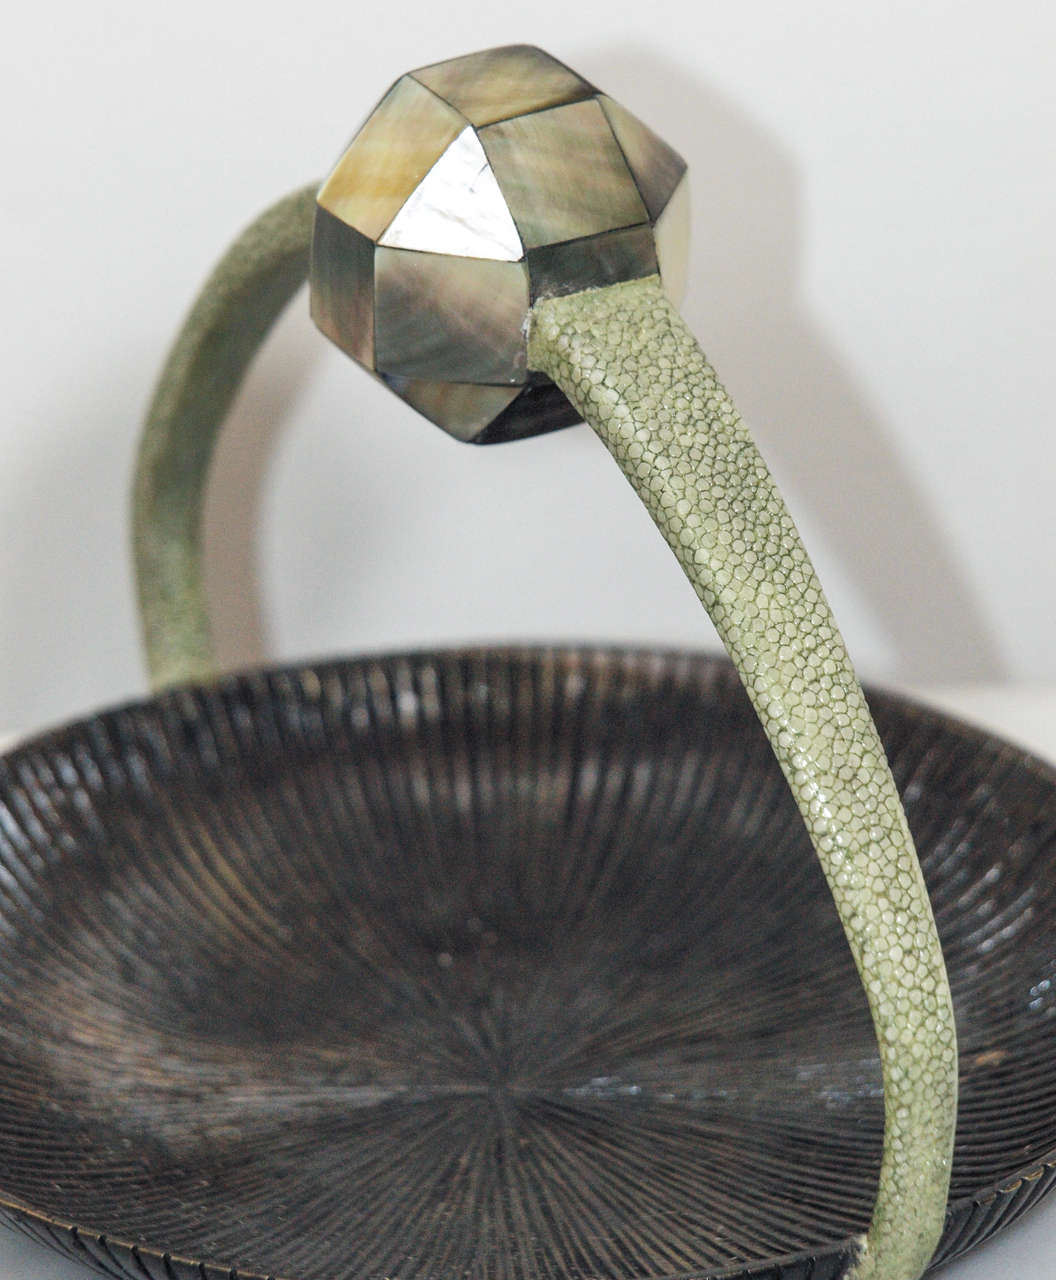 Contemporary Small Bronze Vessel with Shagreen Handle, by R&Y Augousti, Paris